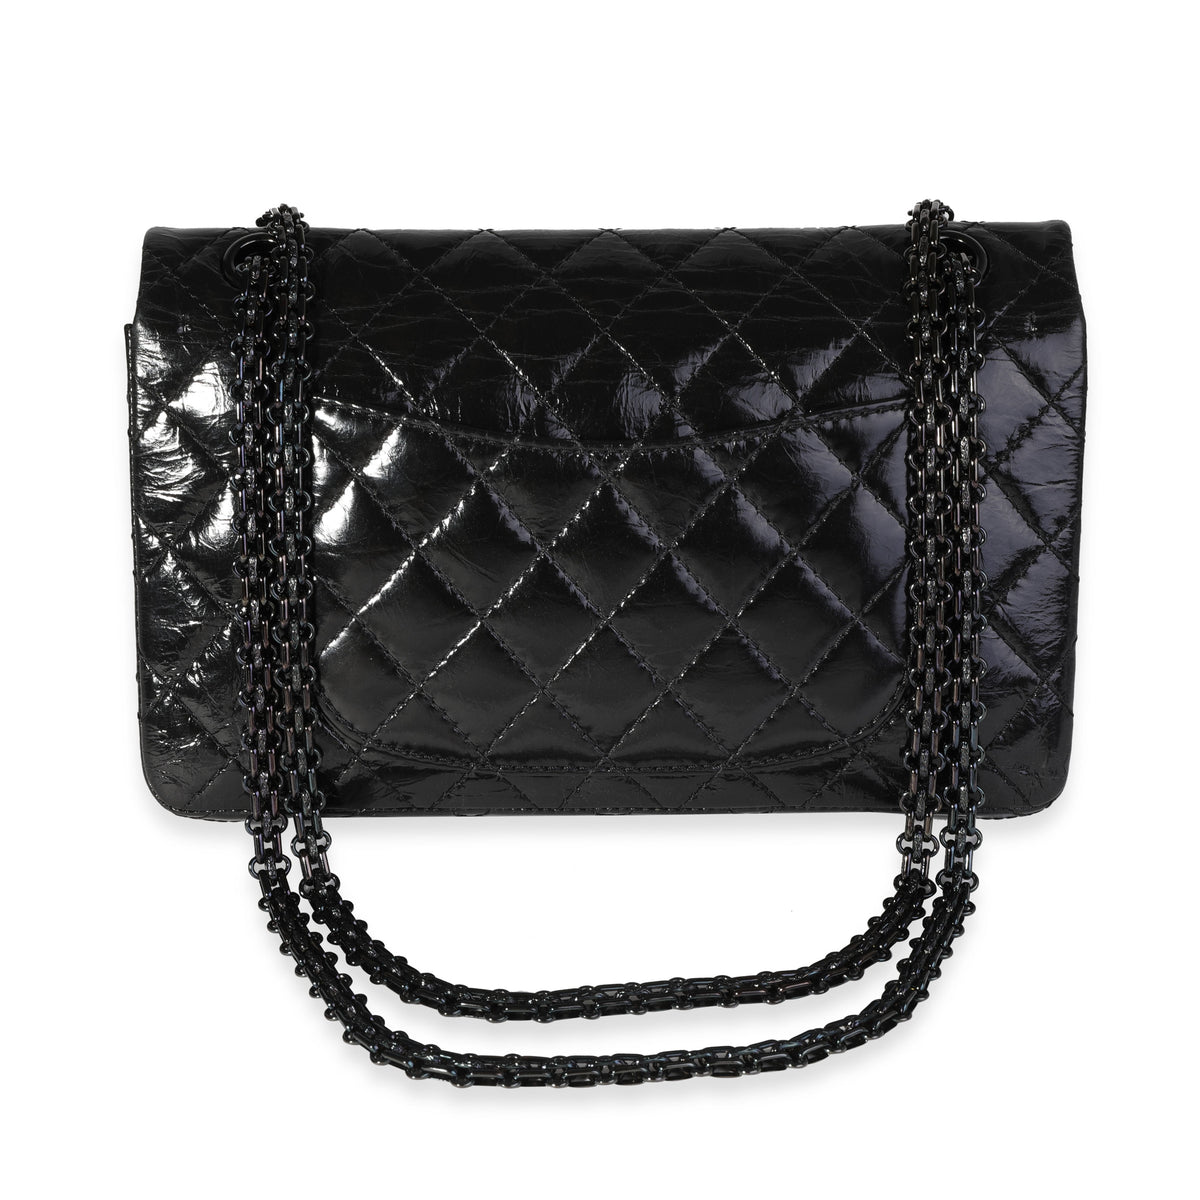 Chanel 225 Reissue Double Flap Bag in Black Distressed Calfskin and  Antiqued Gold Hardware - SOLD